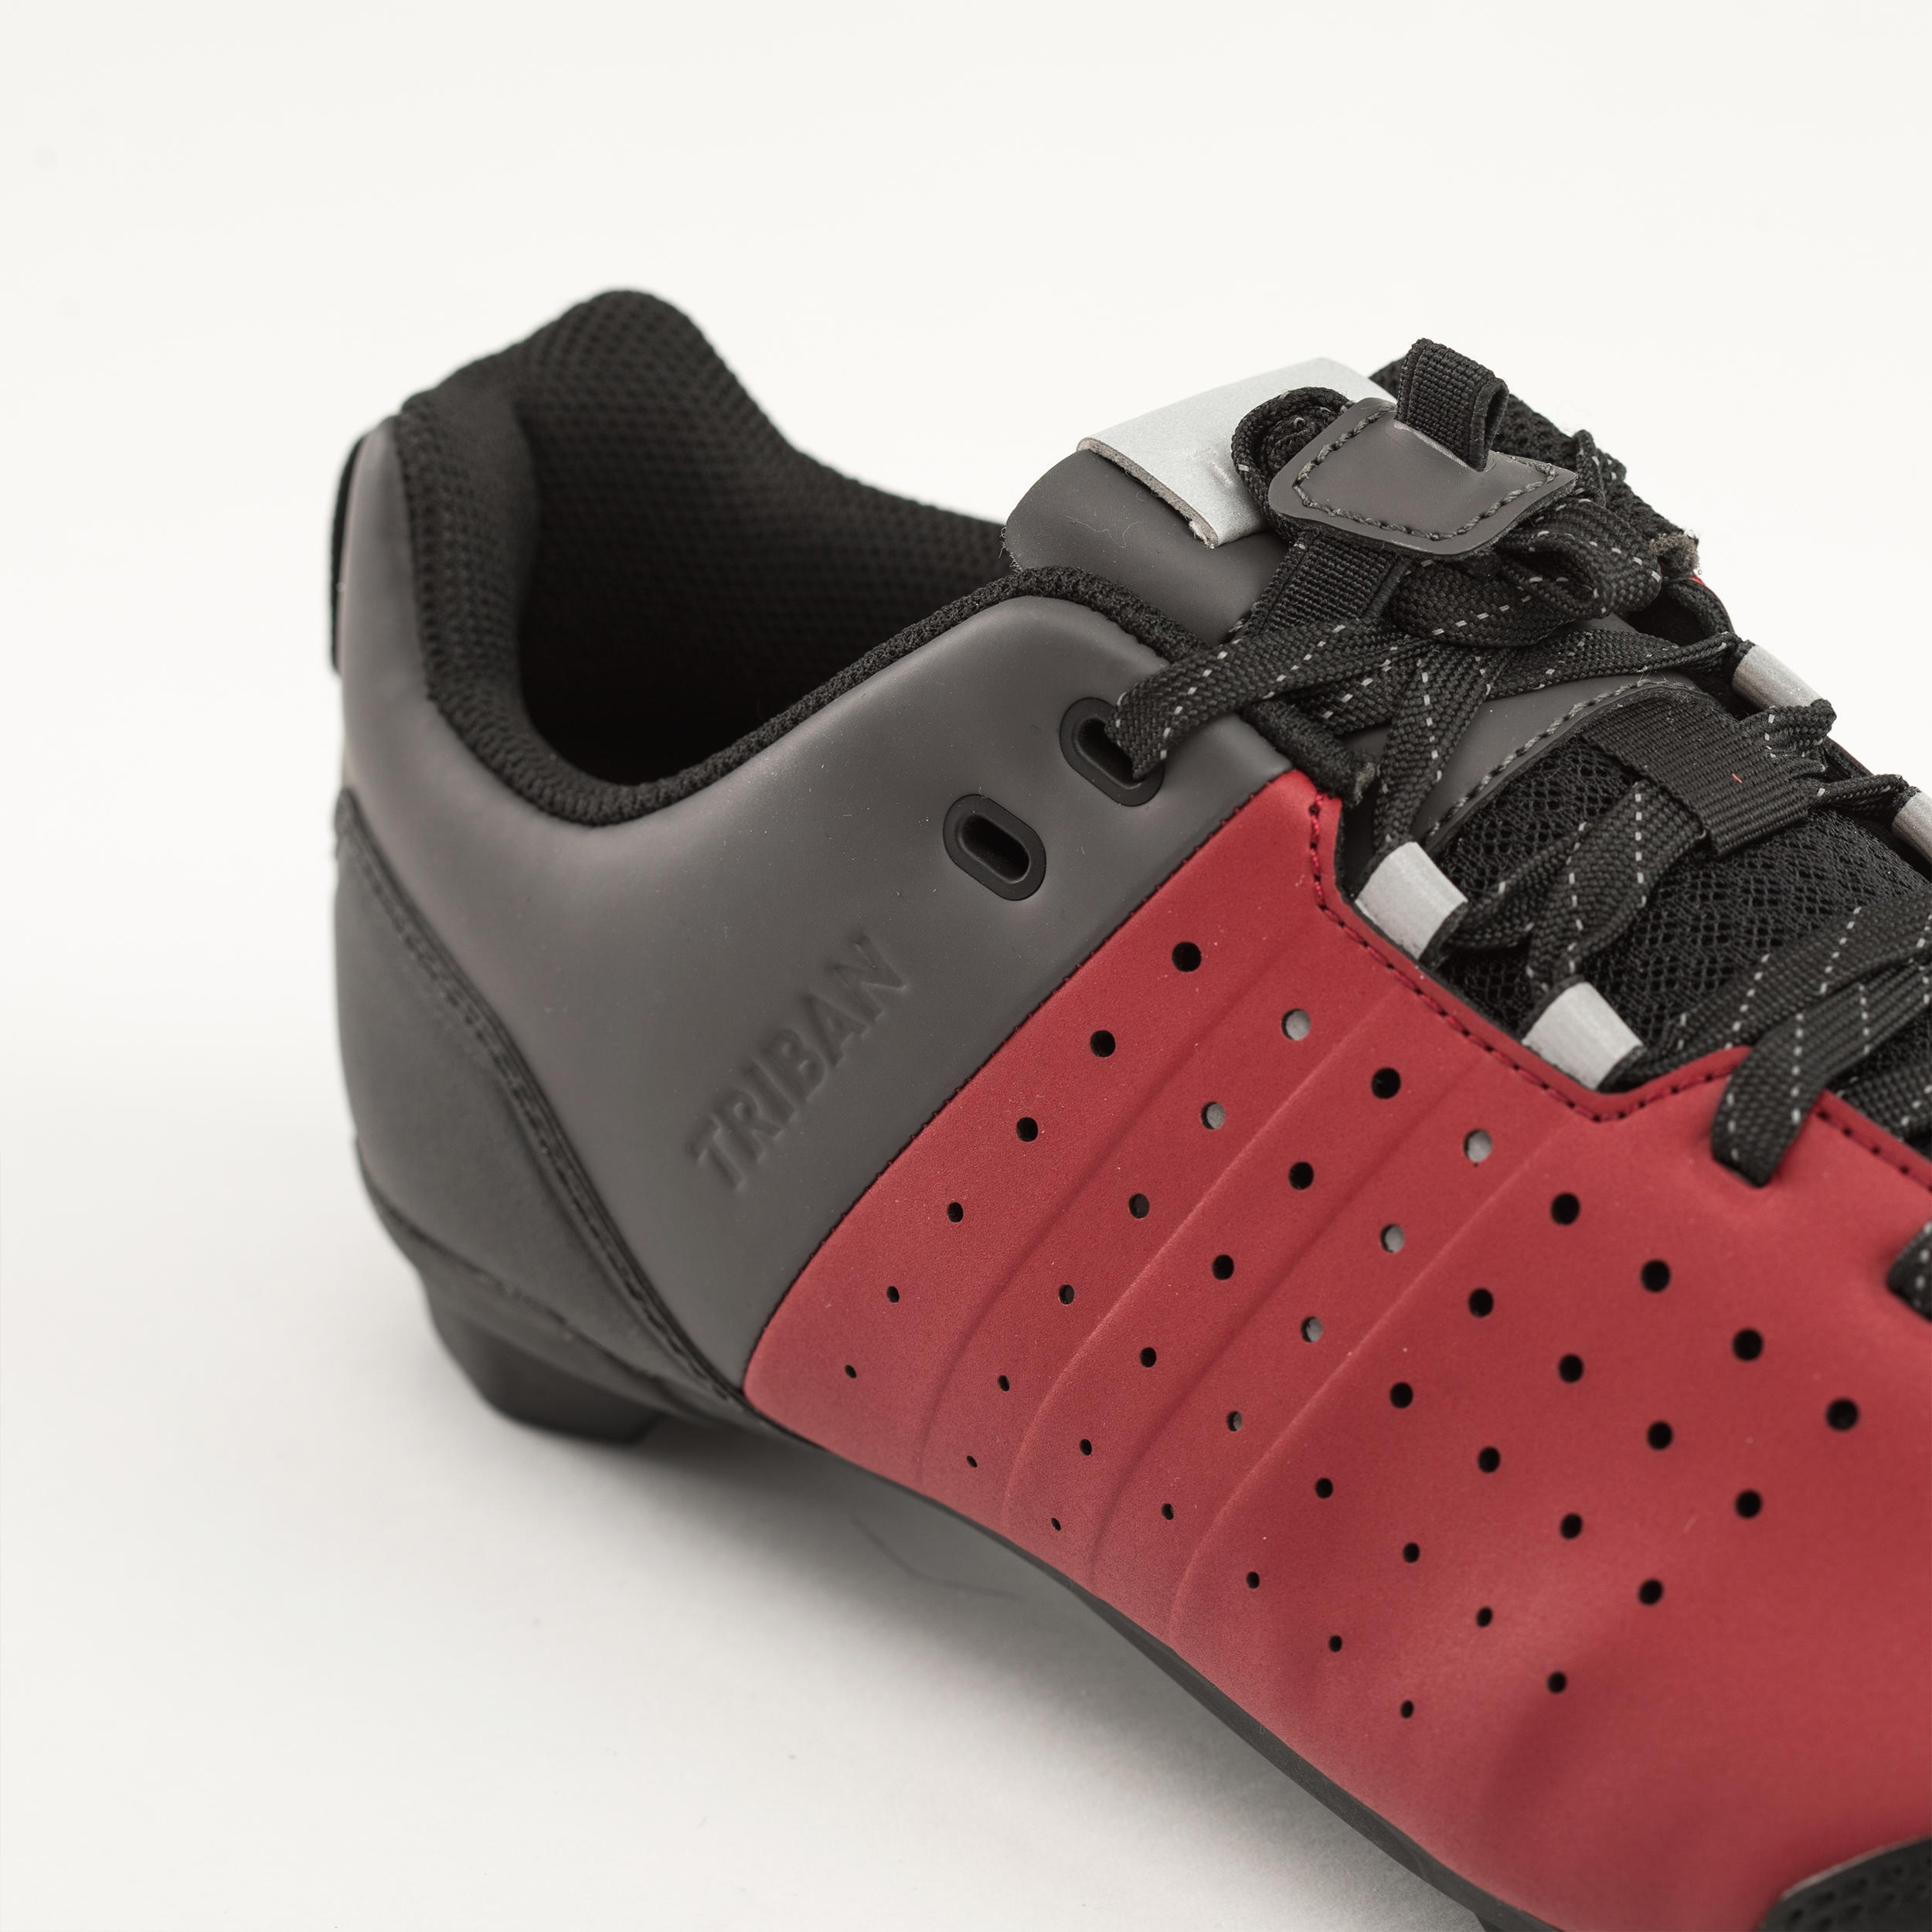 Road and Gravel Cycling Lace-Up SPD Shoes GRVL 500 - Burgundy / Grey 7/7